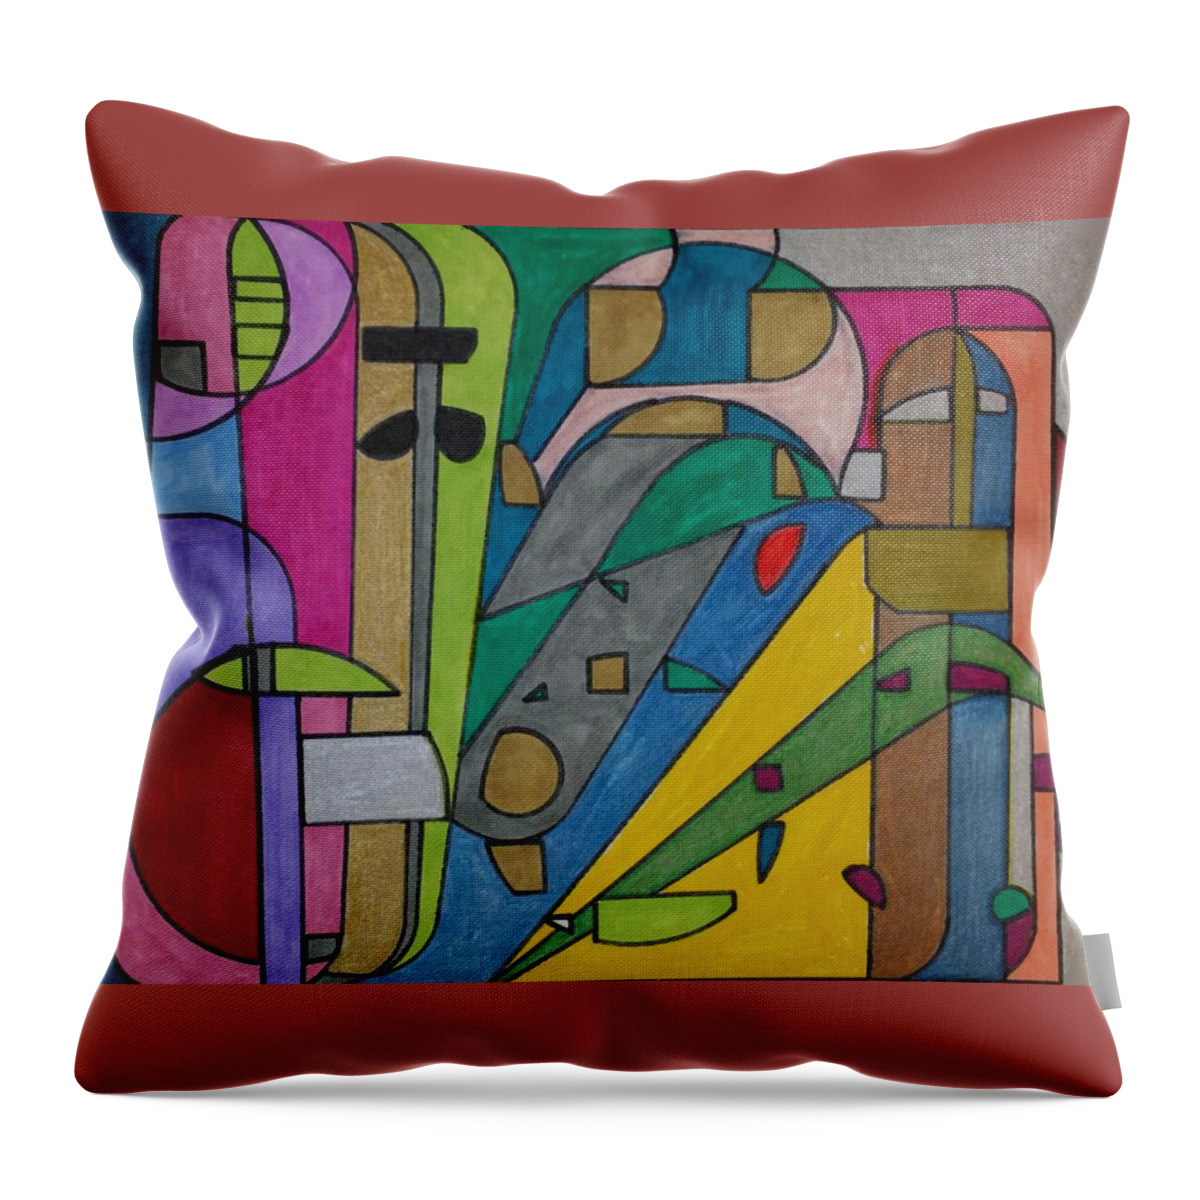 Geometric Art Throw Pillow featuring the glass art Dream 117 by S S-ray